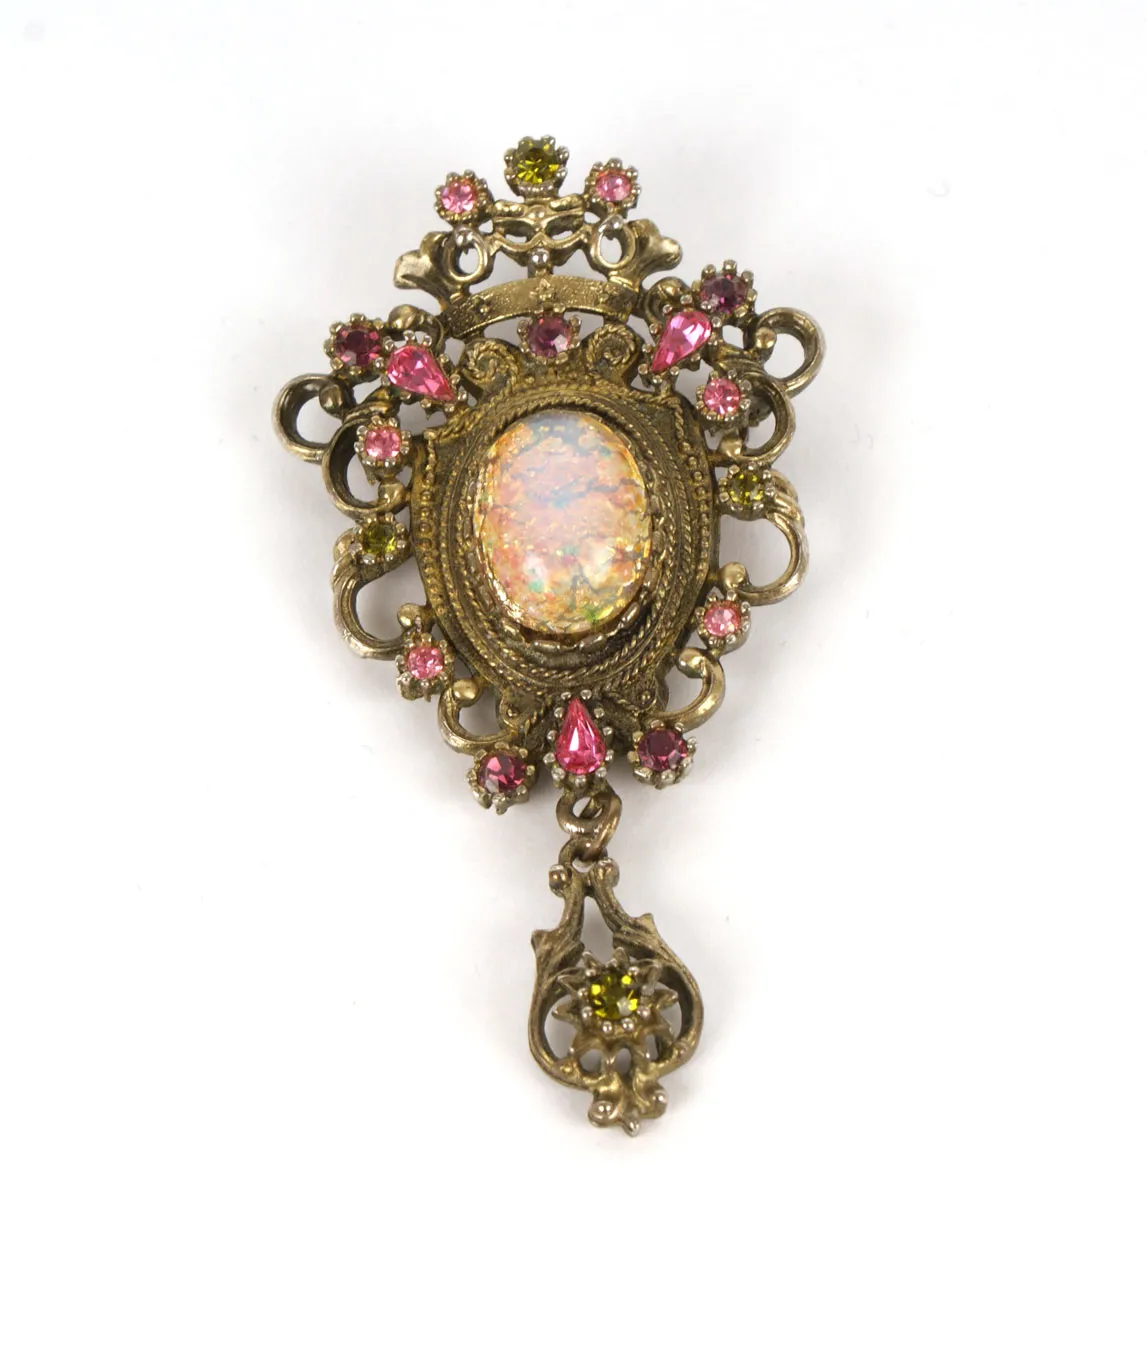 Vintage Sarah Coventry faux opal pendant brooch